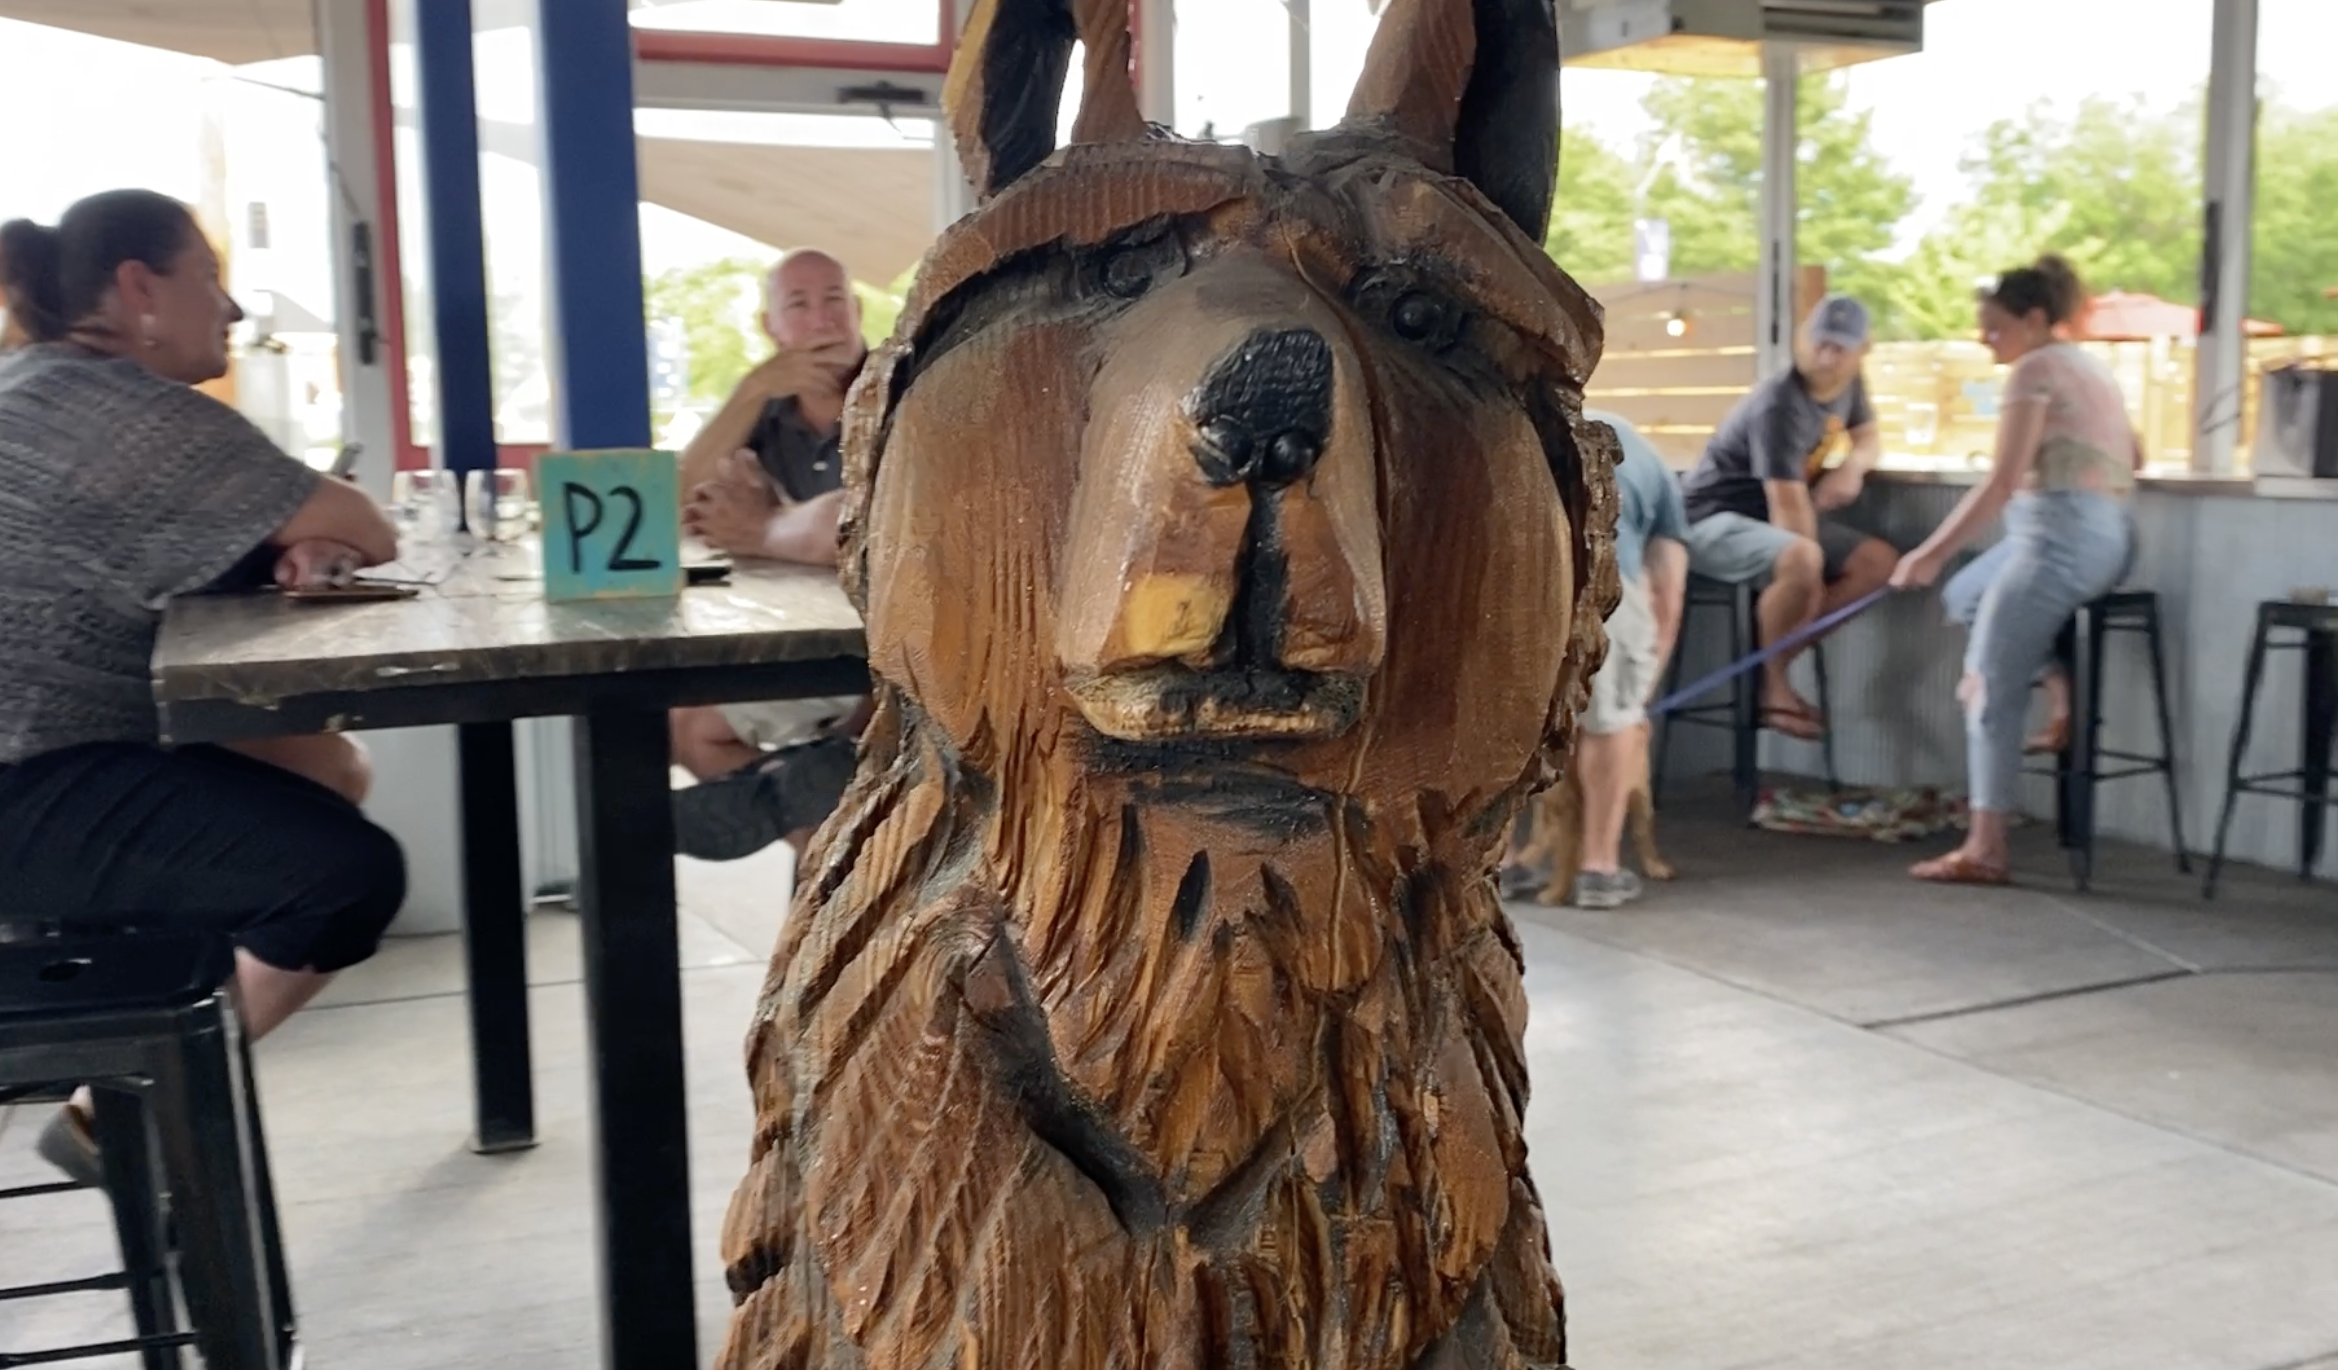 This is a wooden statue of a dog at Romer's K9 Club Taproom. Behind the statue are people drinking beer.